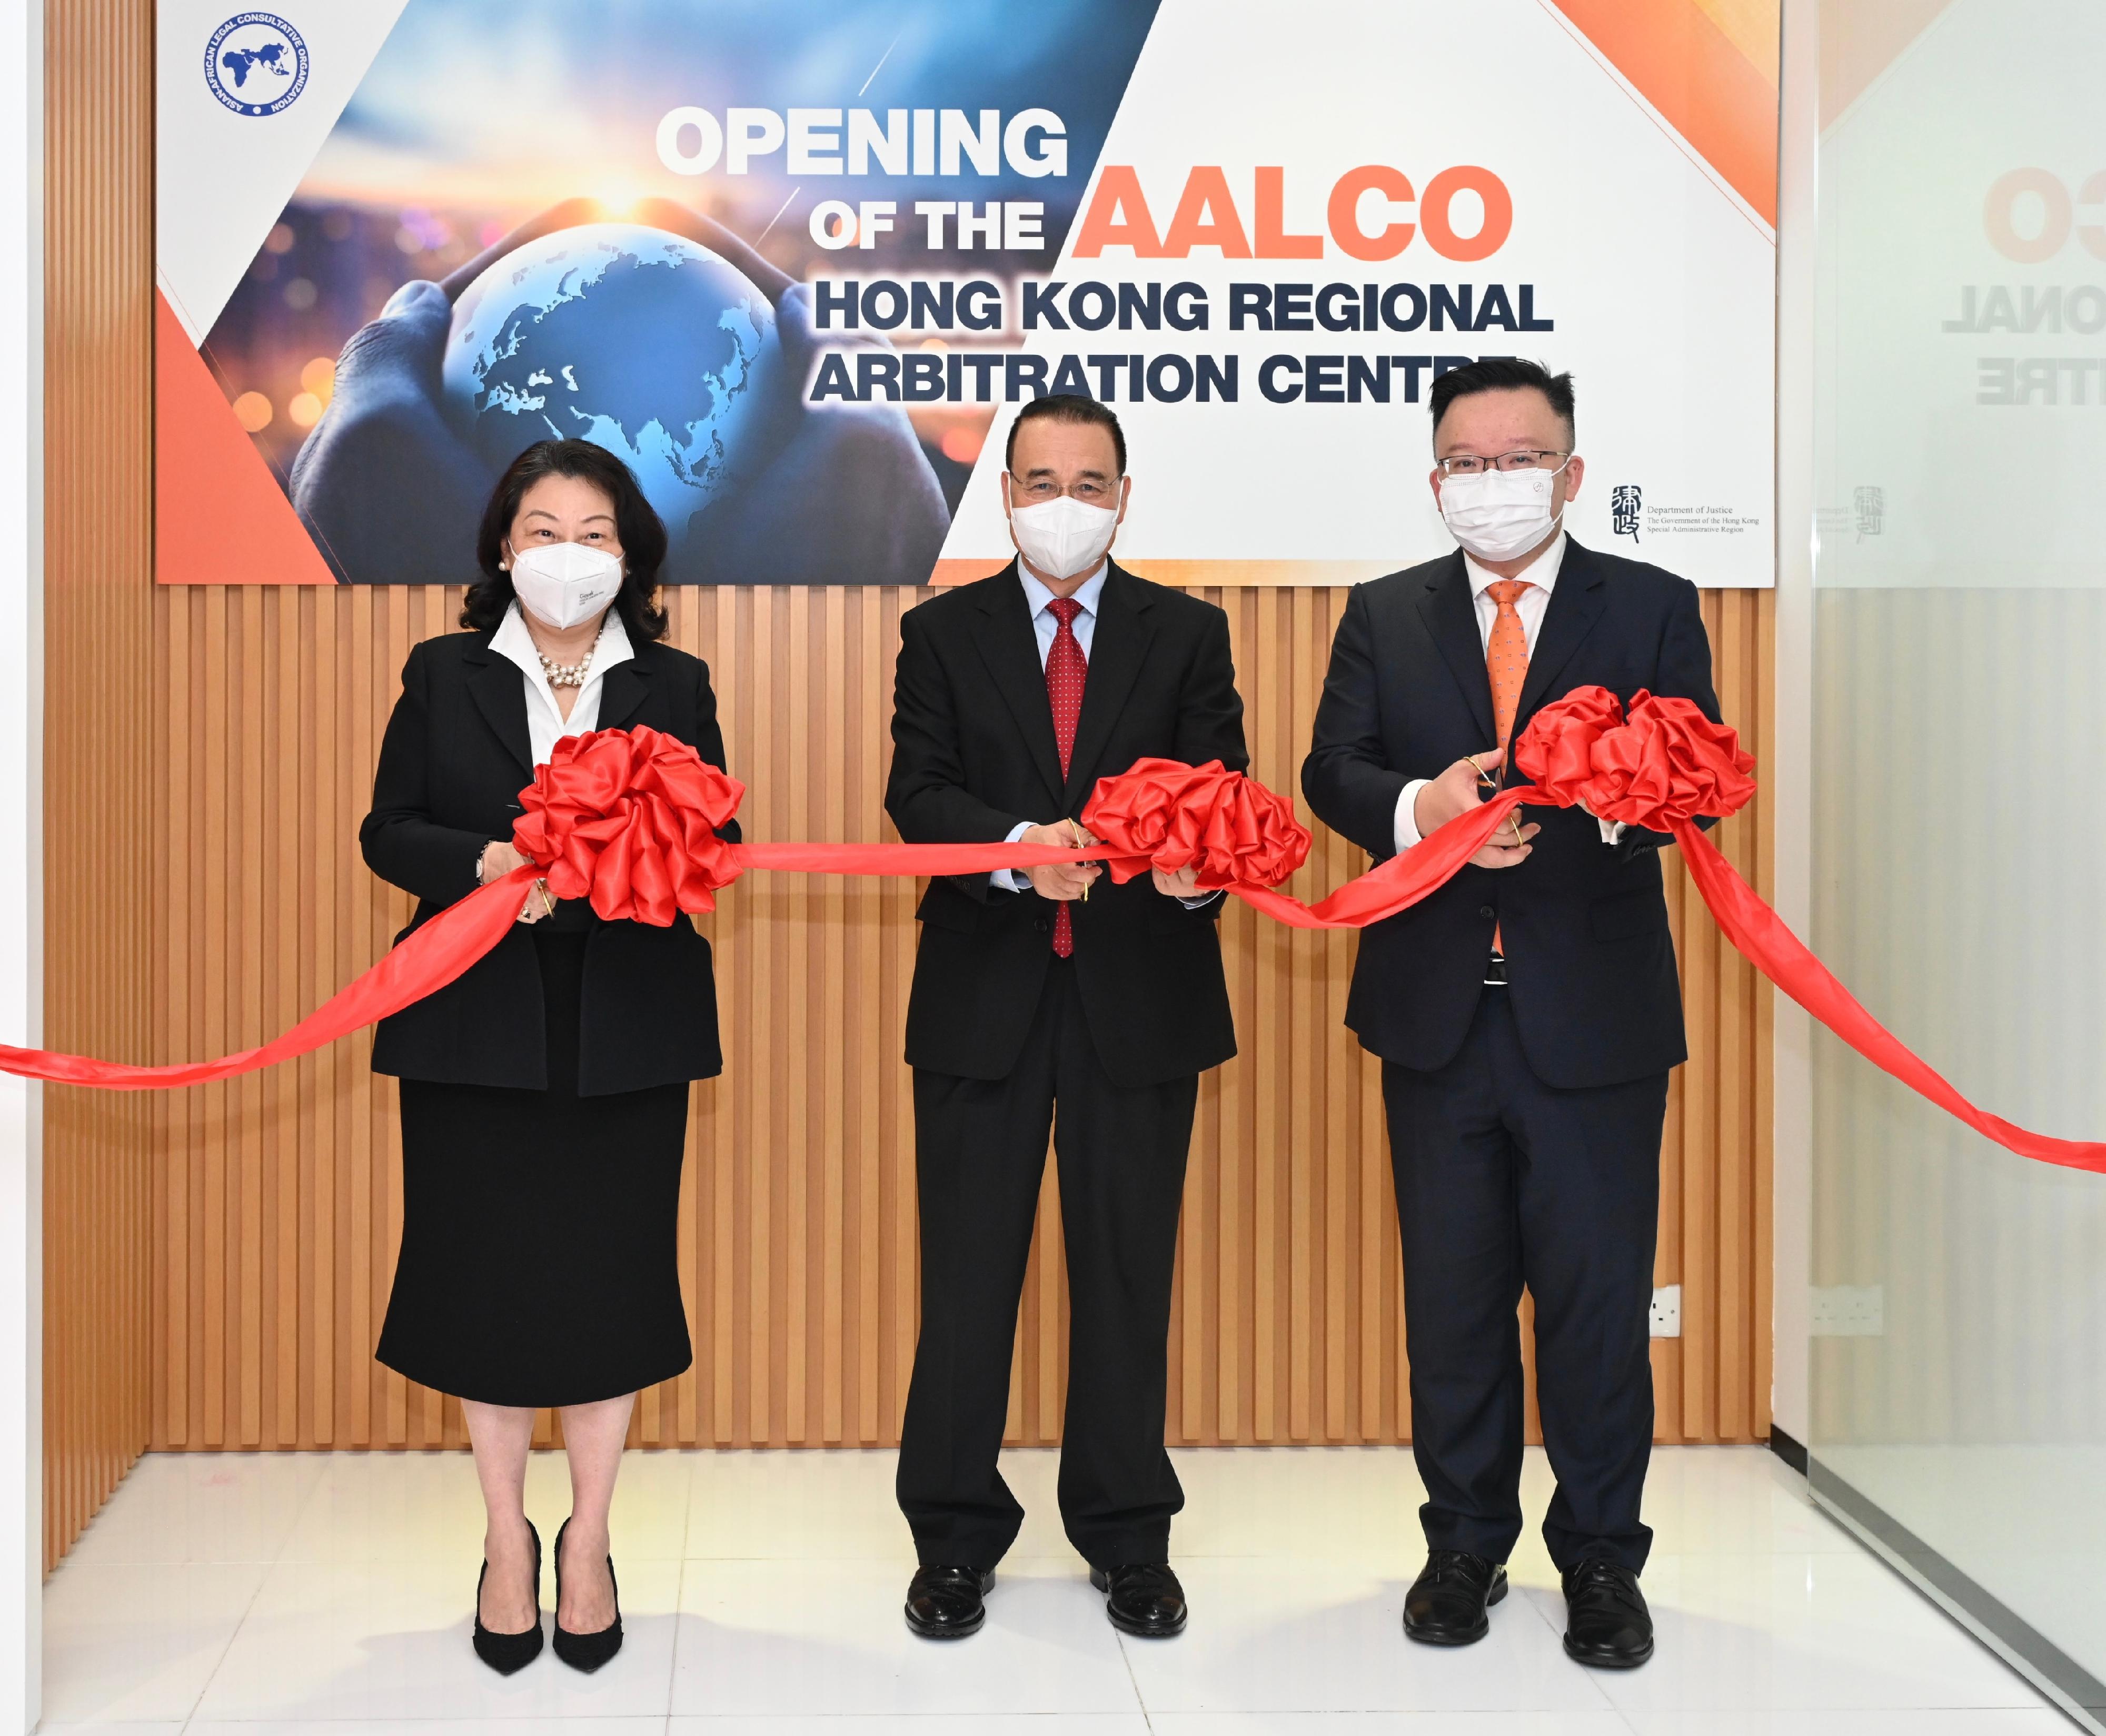 The AALCO Hong Kong Regional Arbitration Centre was officially opened today (May 25). Photo shows (from left) the Secretary for Justice, Ms Teresa Cheng, SC; the Commissioner of the Ministry of Foreign Affairs in the Hong Kong Special Administrative Region, Mr Liu Guangyuan; and the Director of the AALCO Hong Kong Regional Arbitration Centre, Mr Nick Chan, cutting ribbons at the opening ceremony.